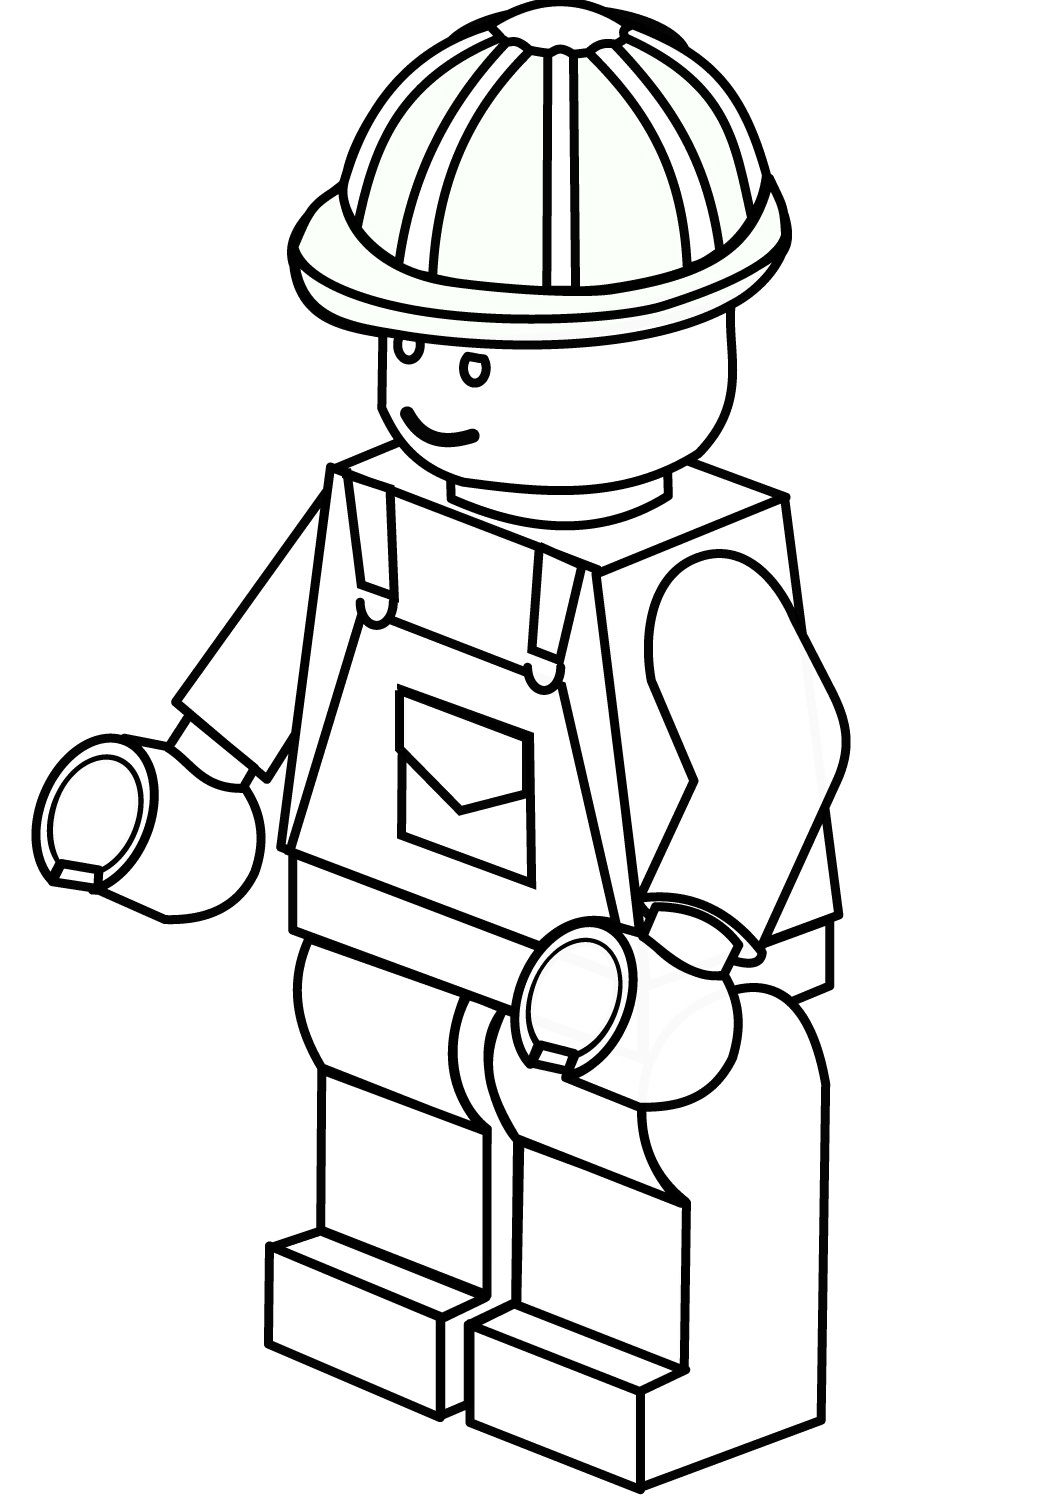 Free for personal use lego people drawing of your choice lego coloring pages lego coloring sheet lego coloring